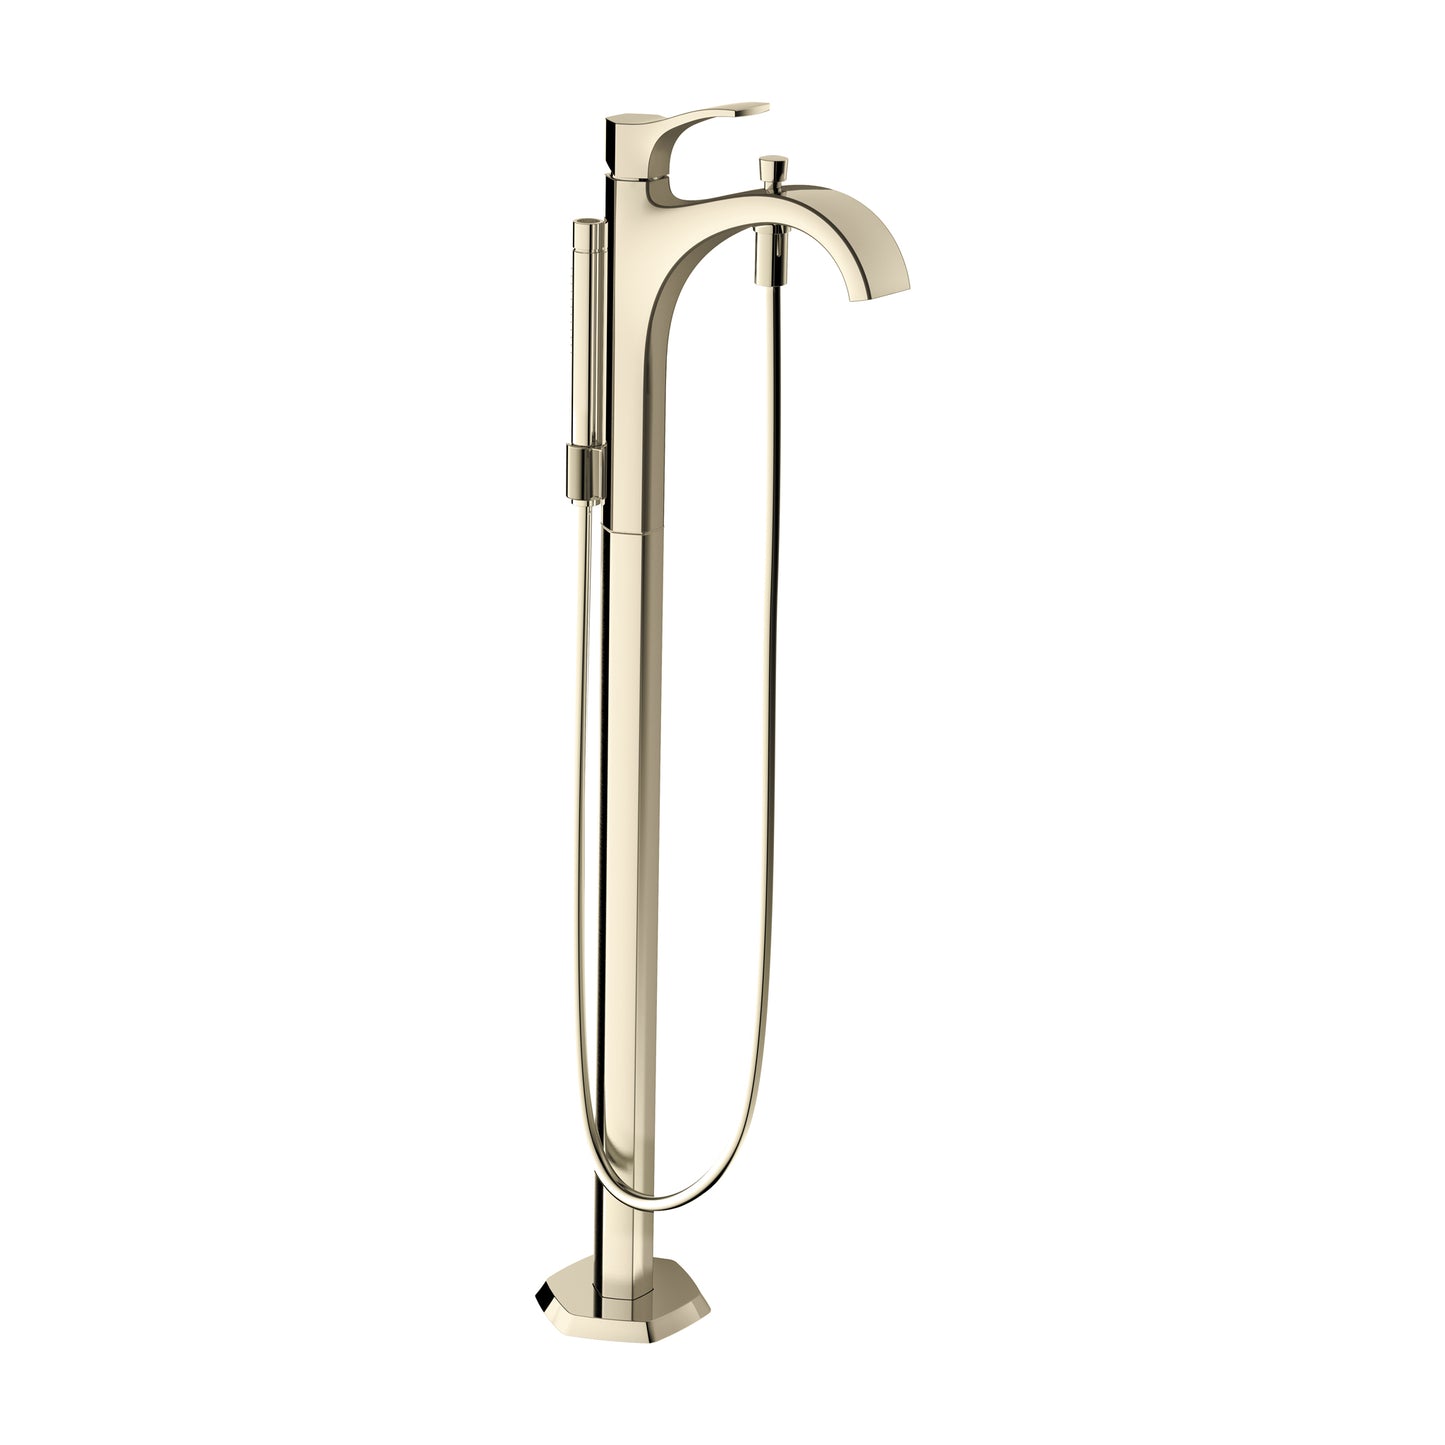 HANSGROHE 04818820 Brushed Nickel Locarno Transitional Tub Filler 1.75 GPM